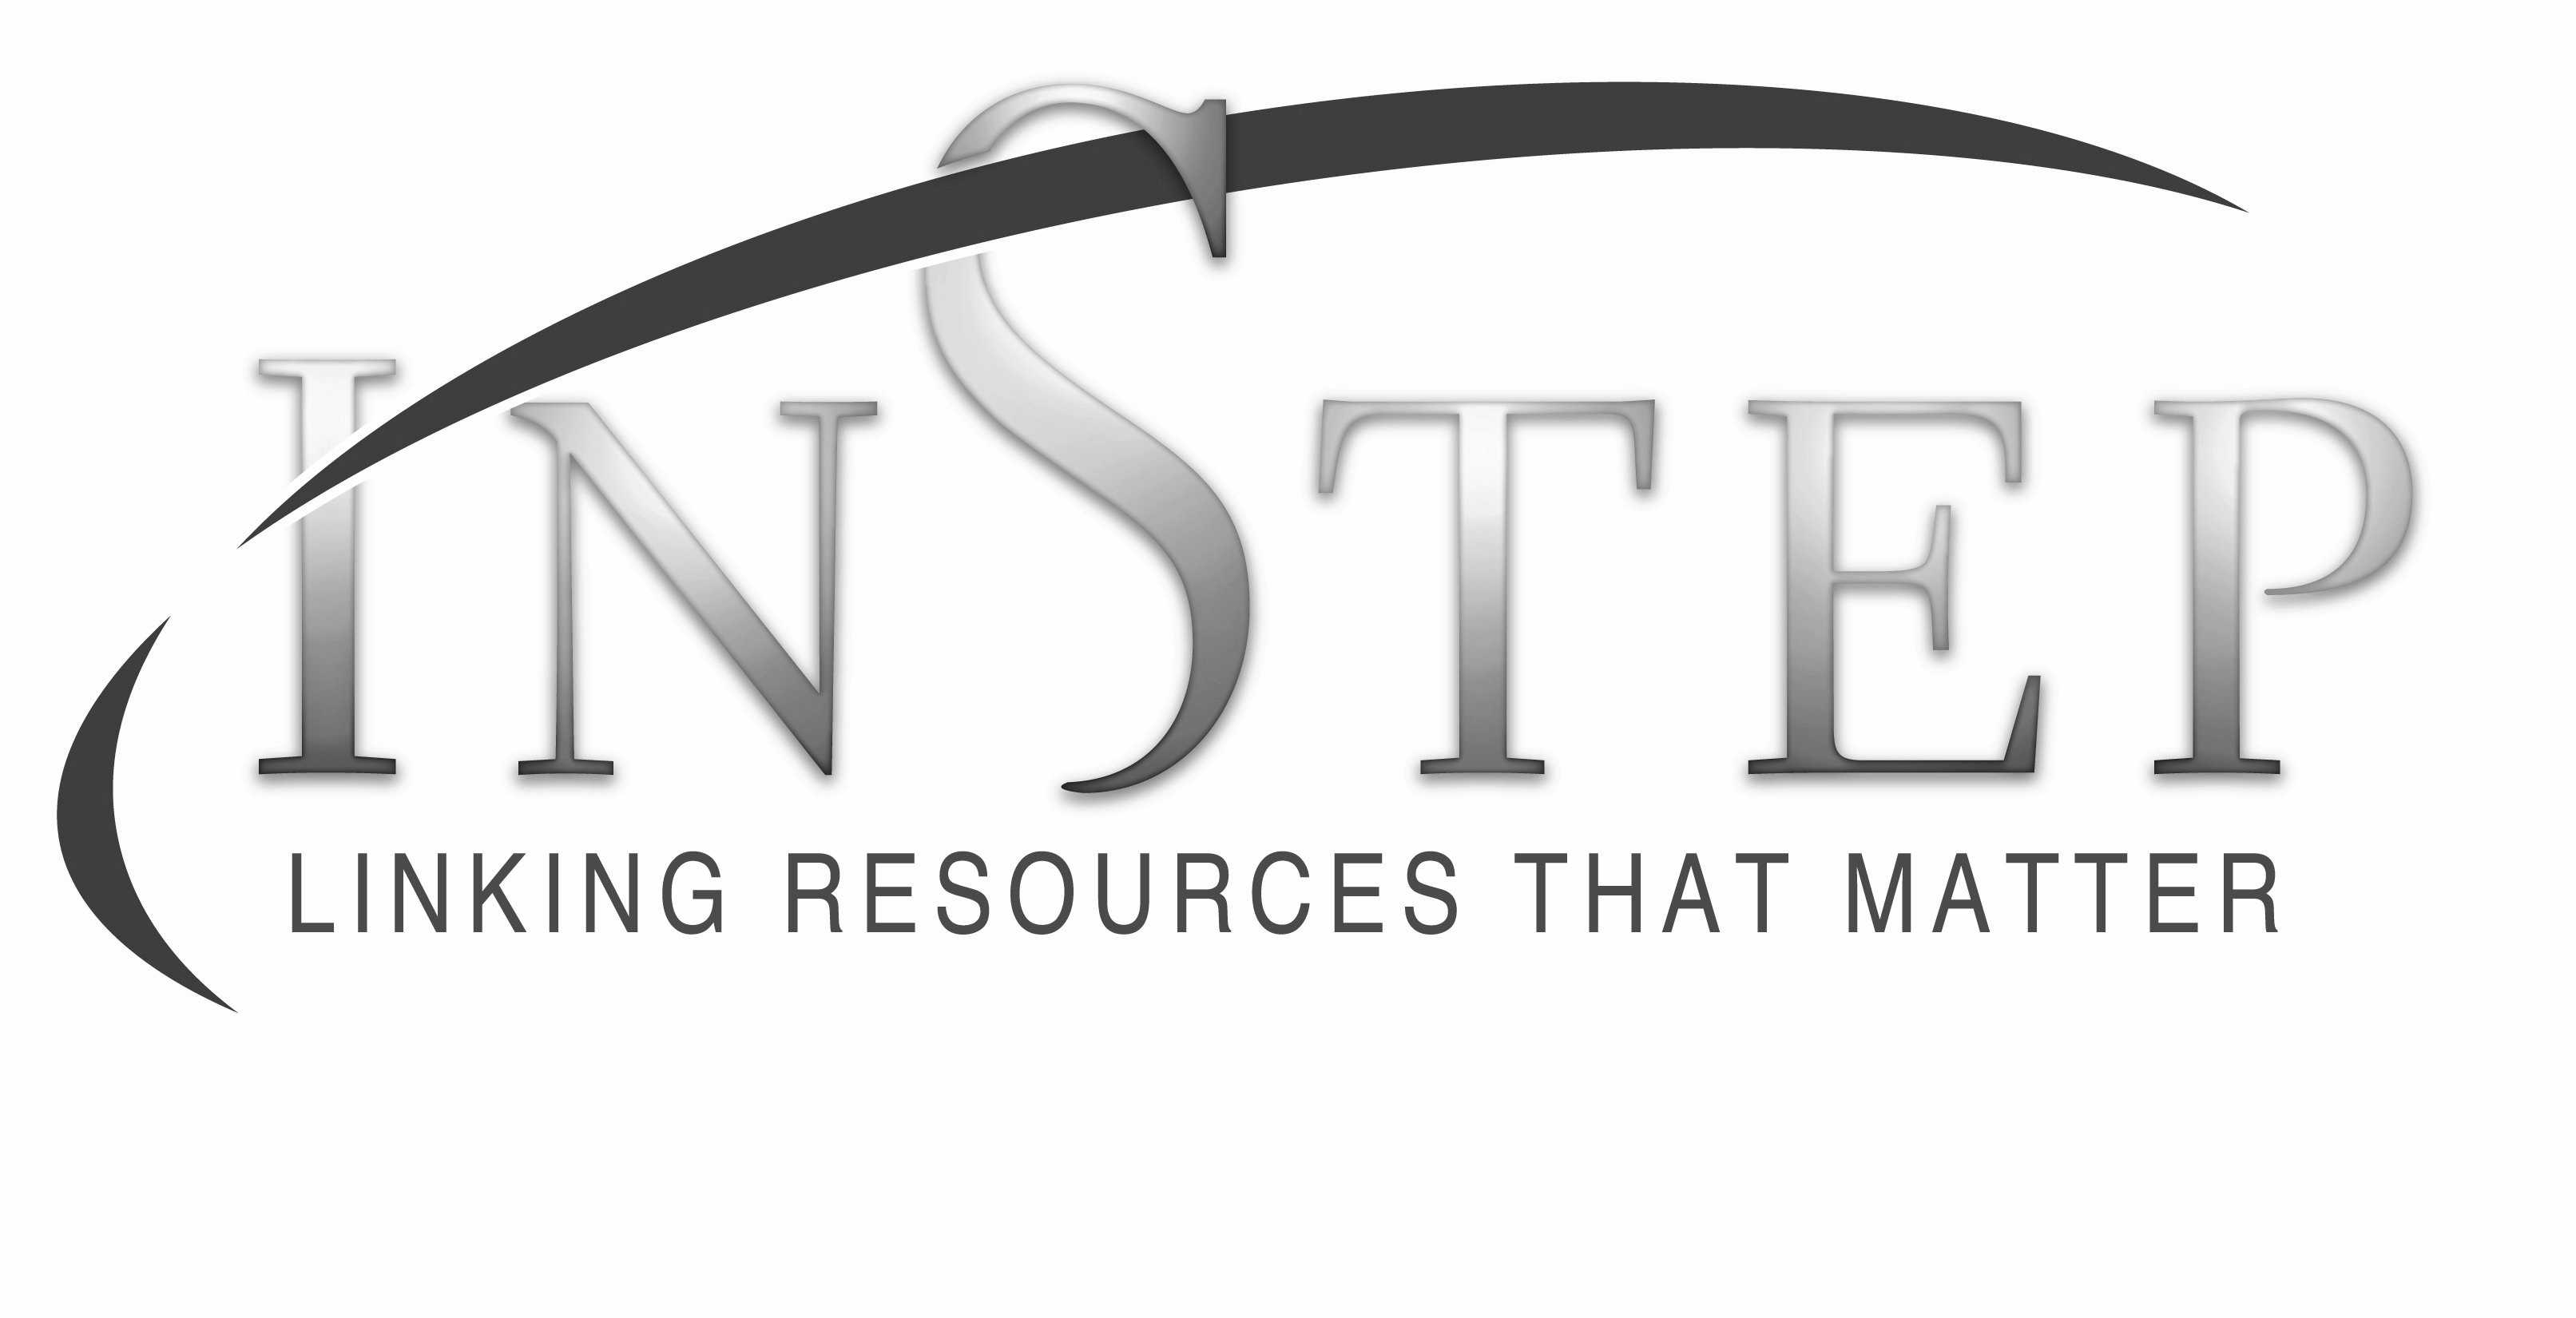  INSTEP LINKING RESOURCES THAT MATTER